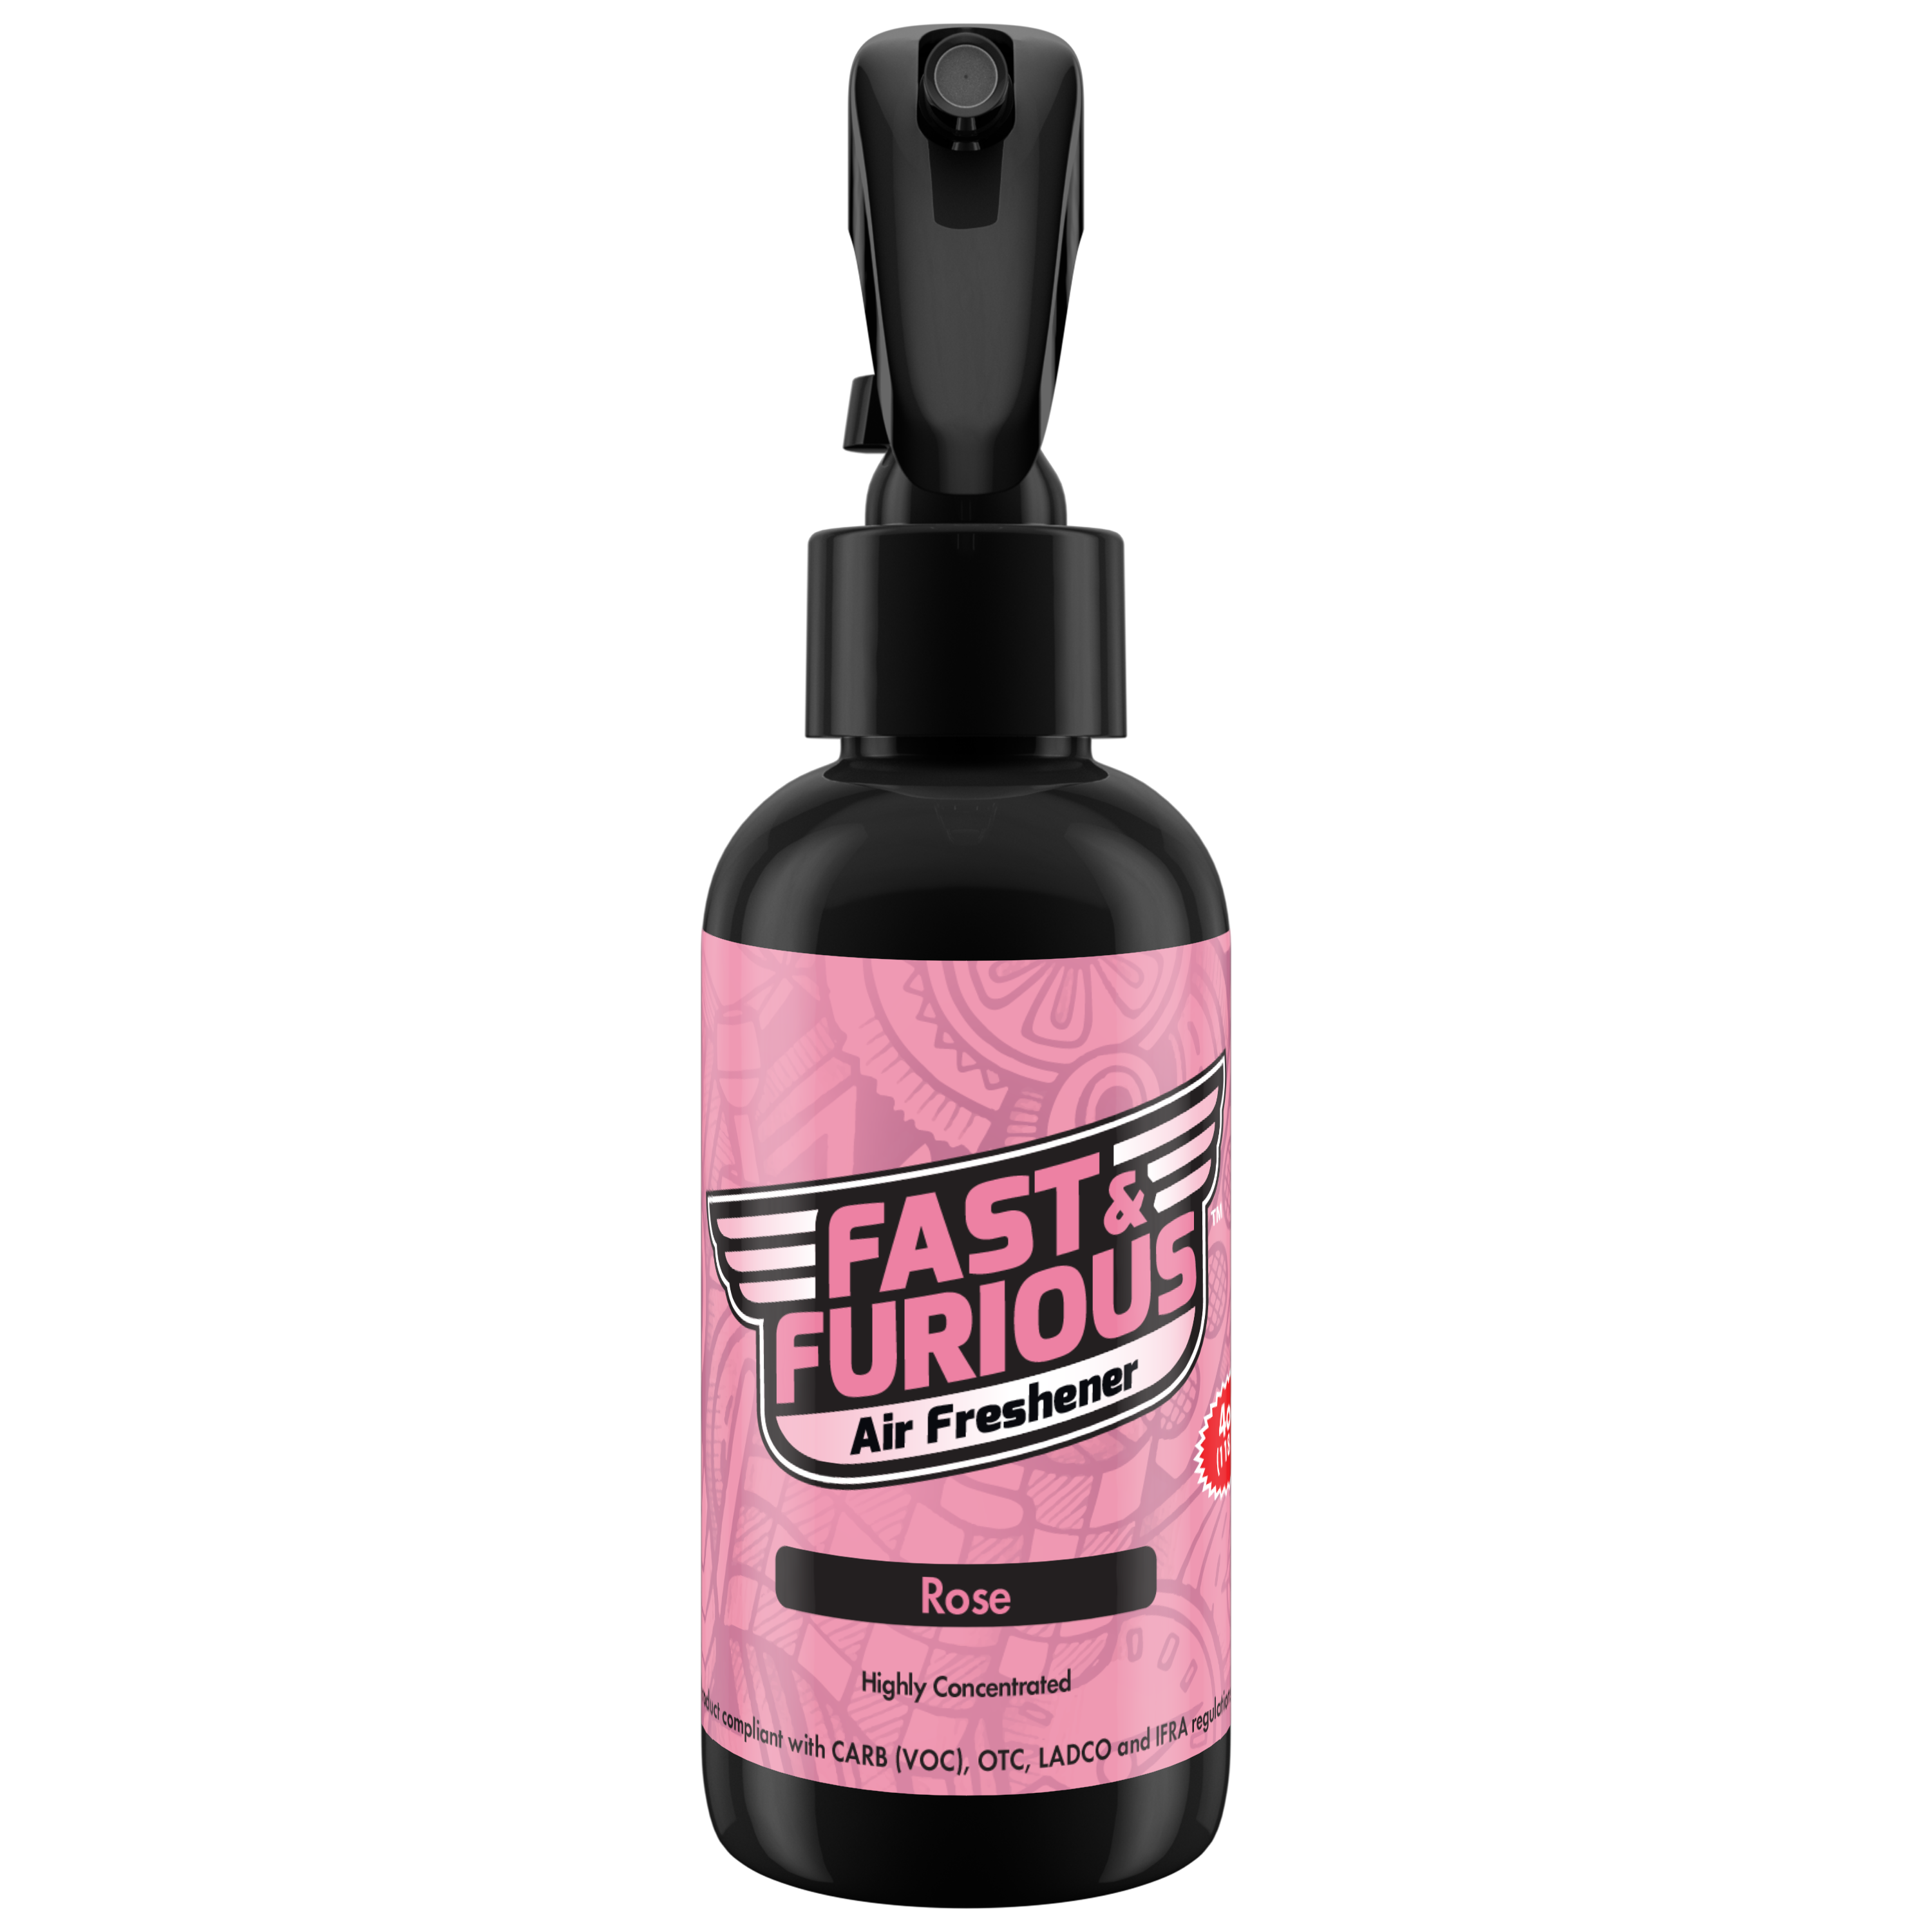 Fast and Furious Air Freshener - Rose Scent Size: 4oz